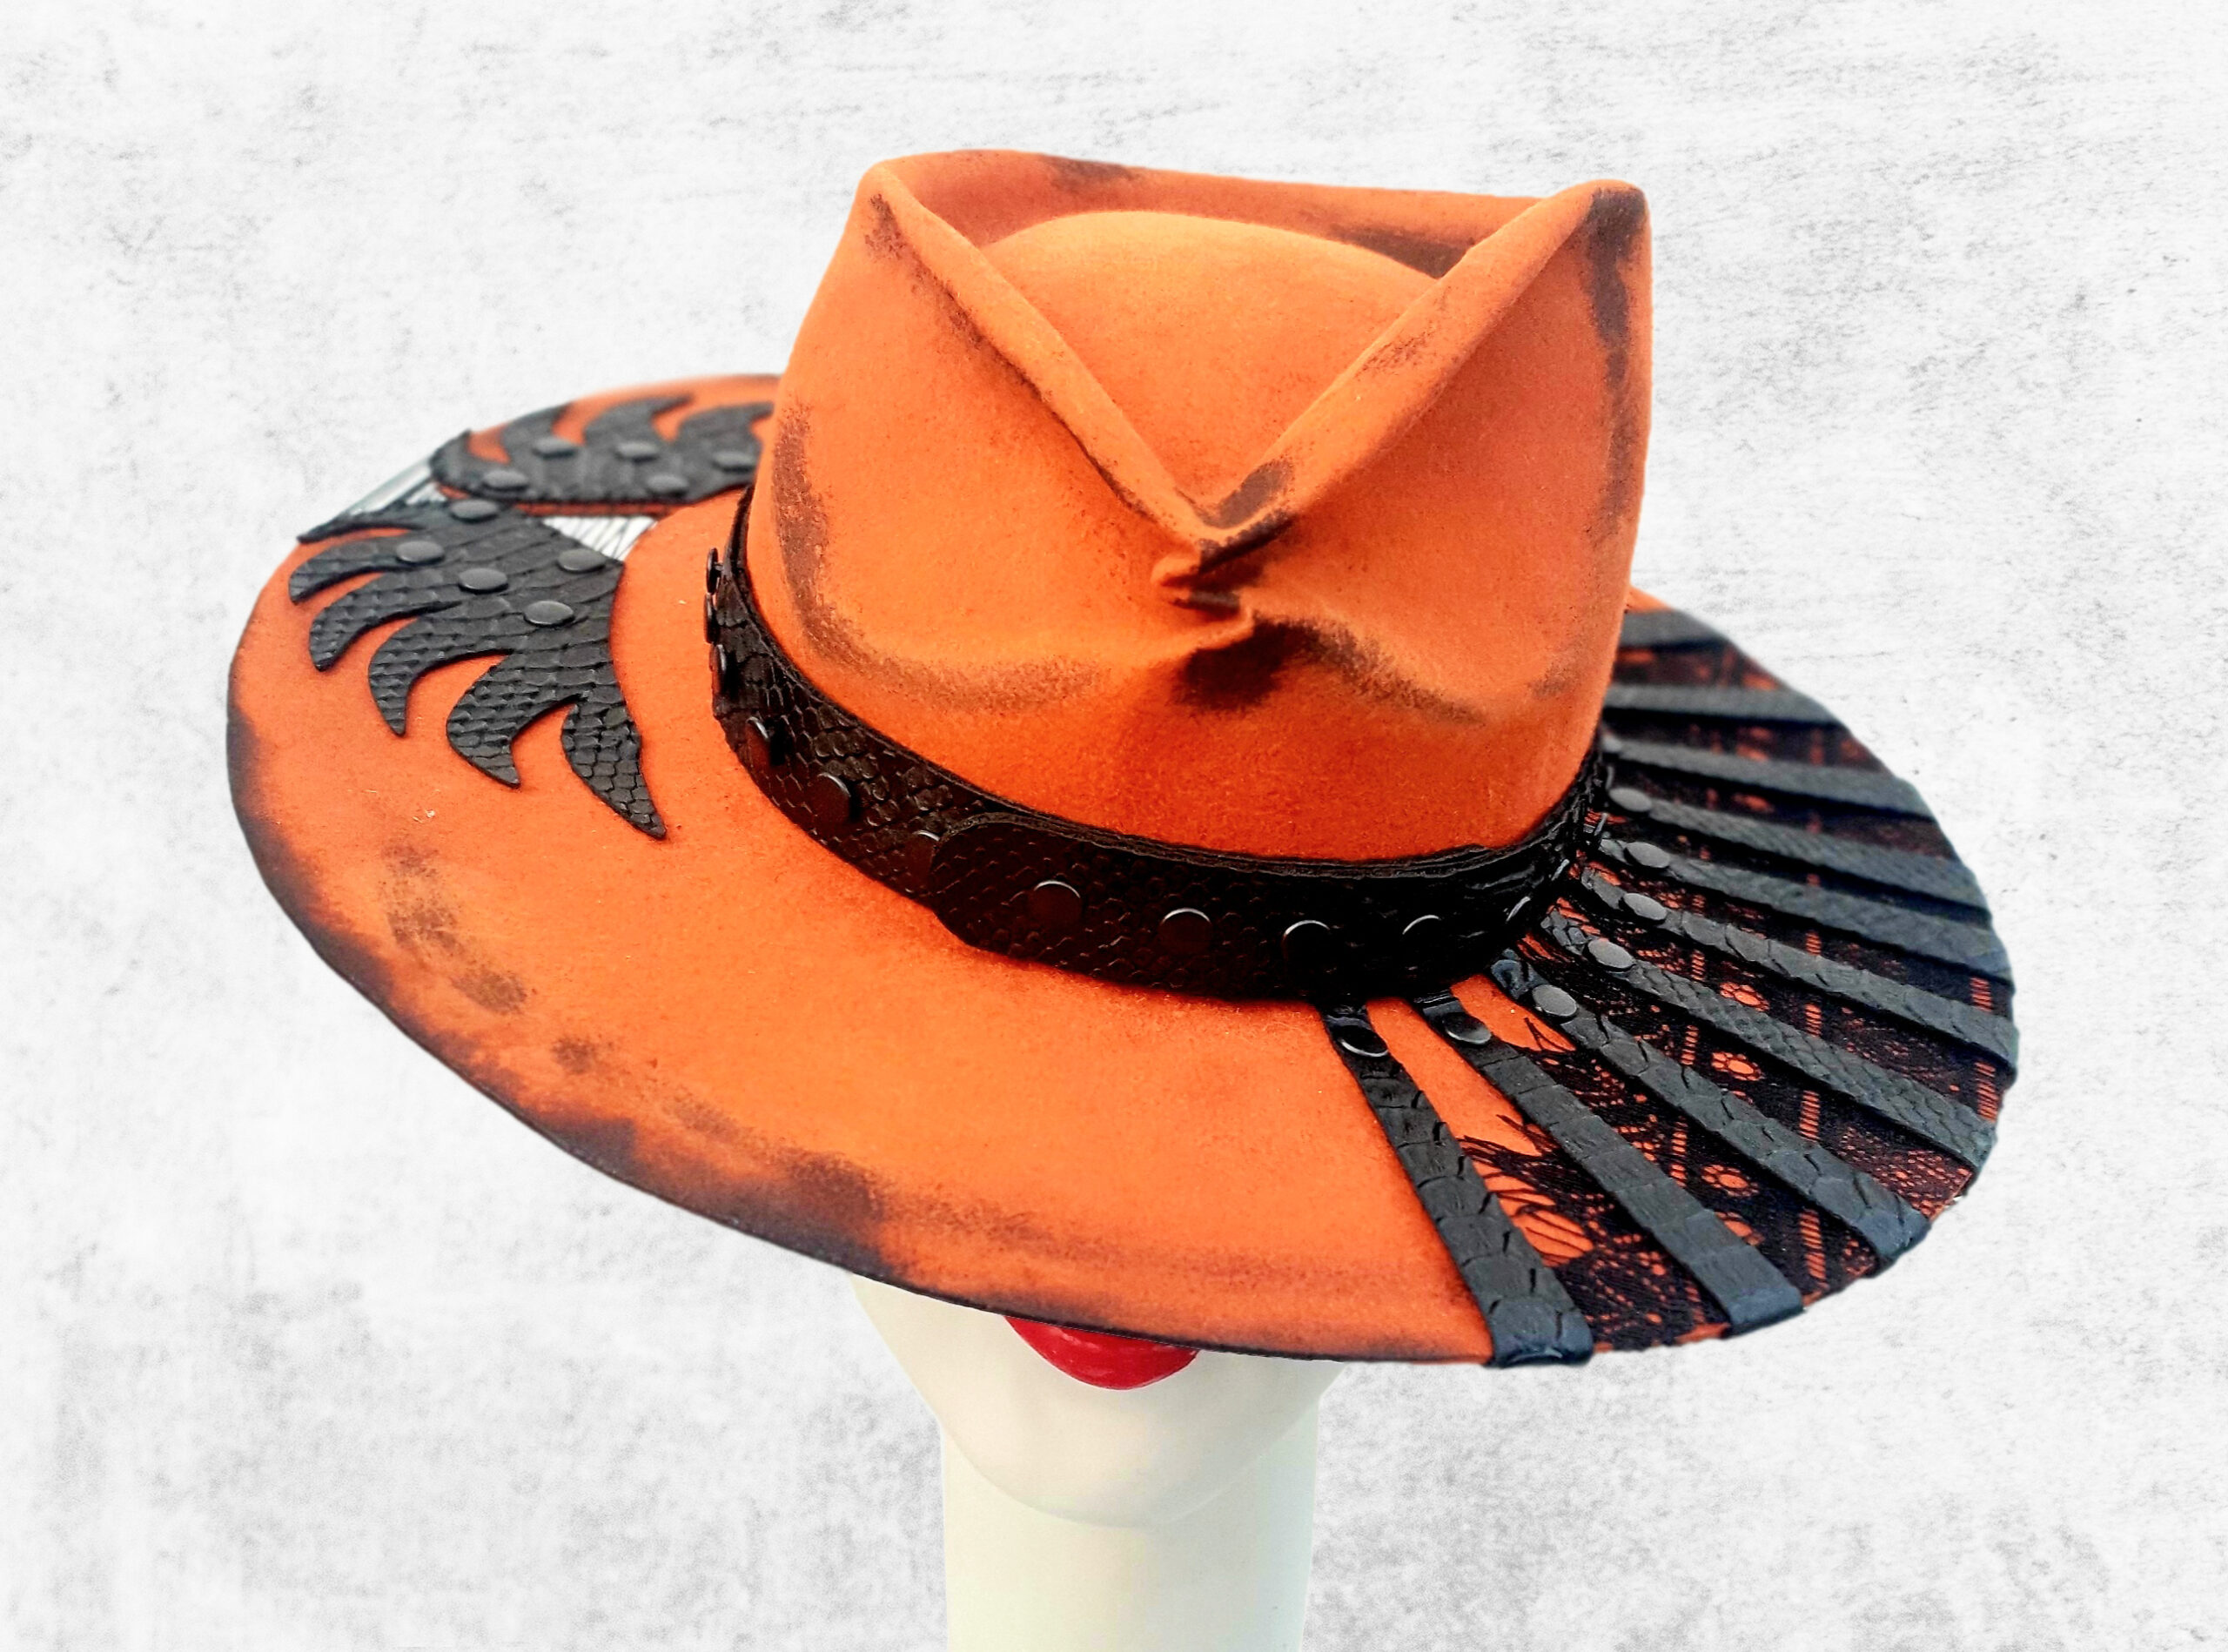 Orange Felt Hat with Black lace and Black Crocko leather - Burnt accents and handmade stitches